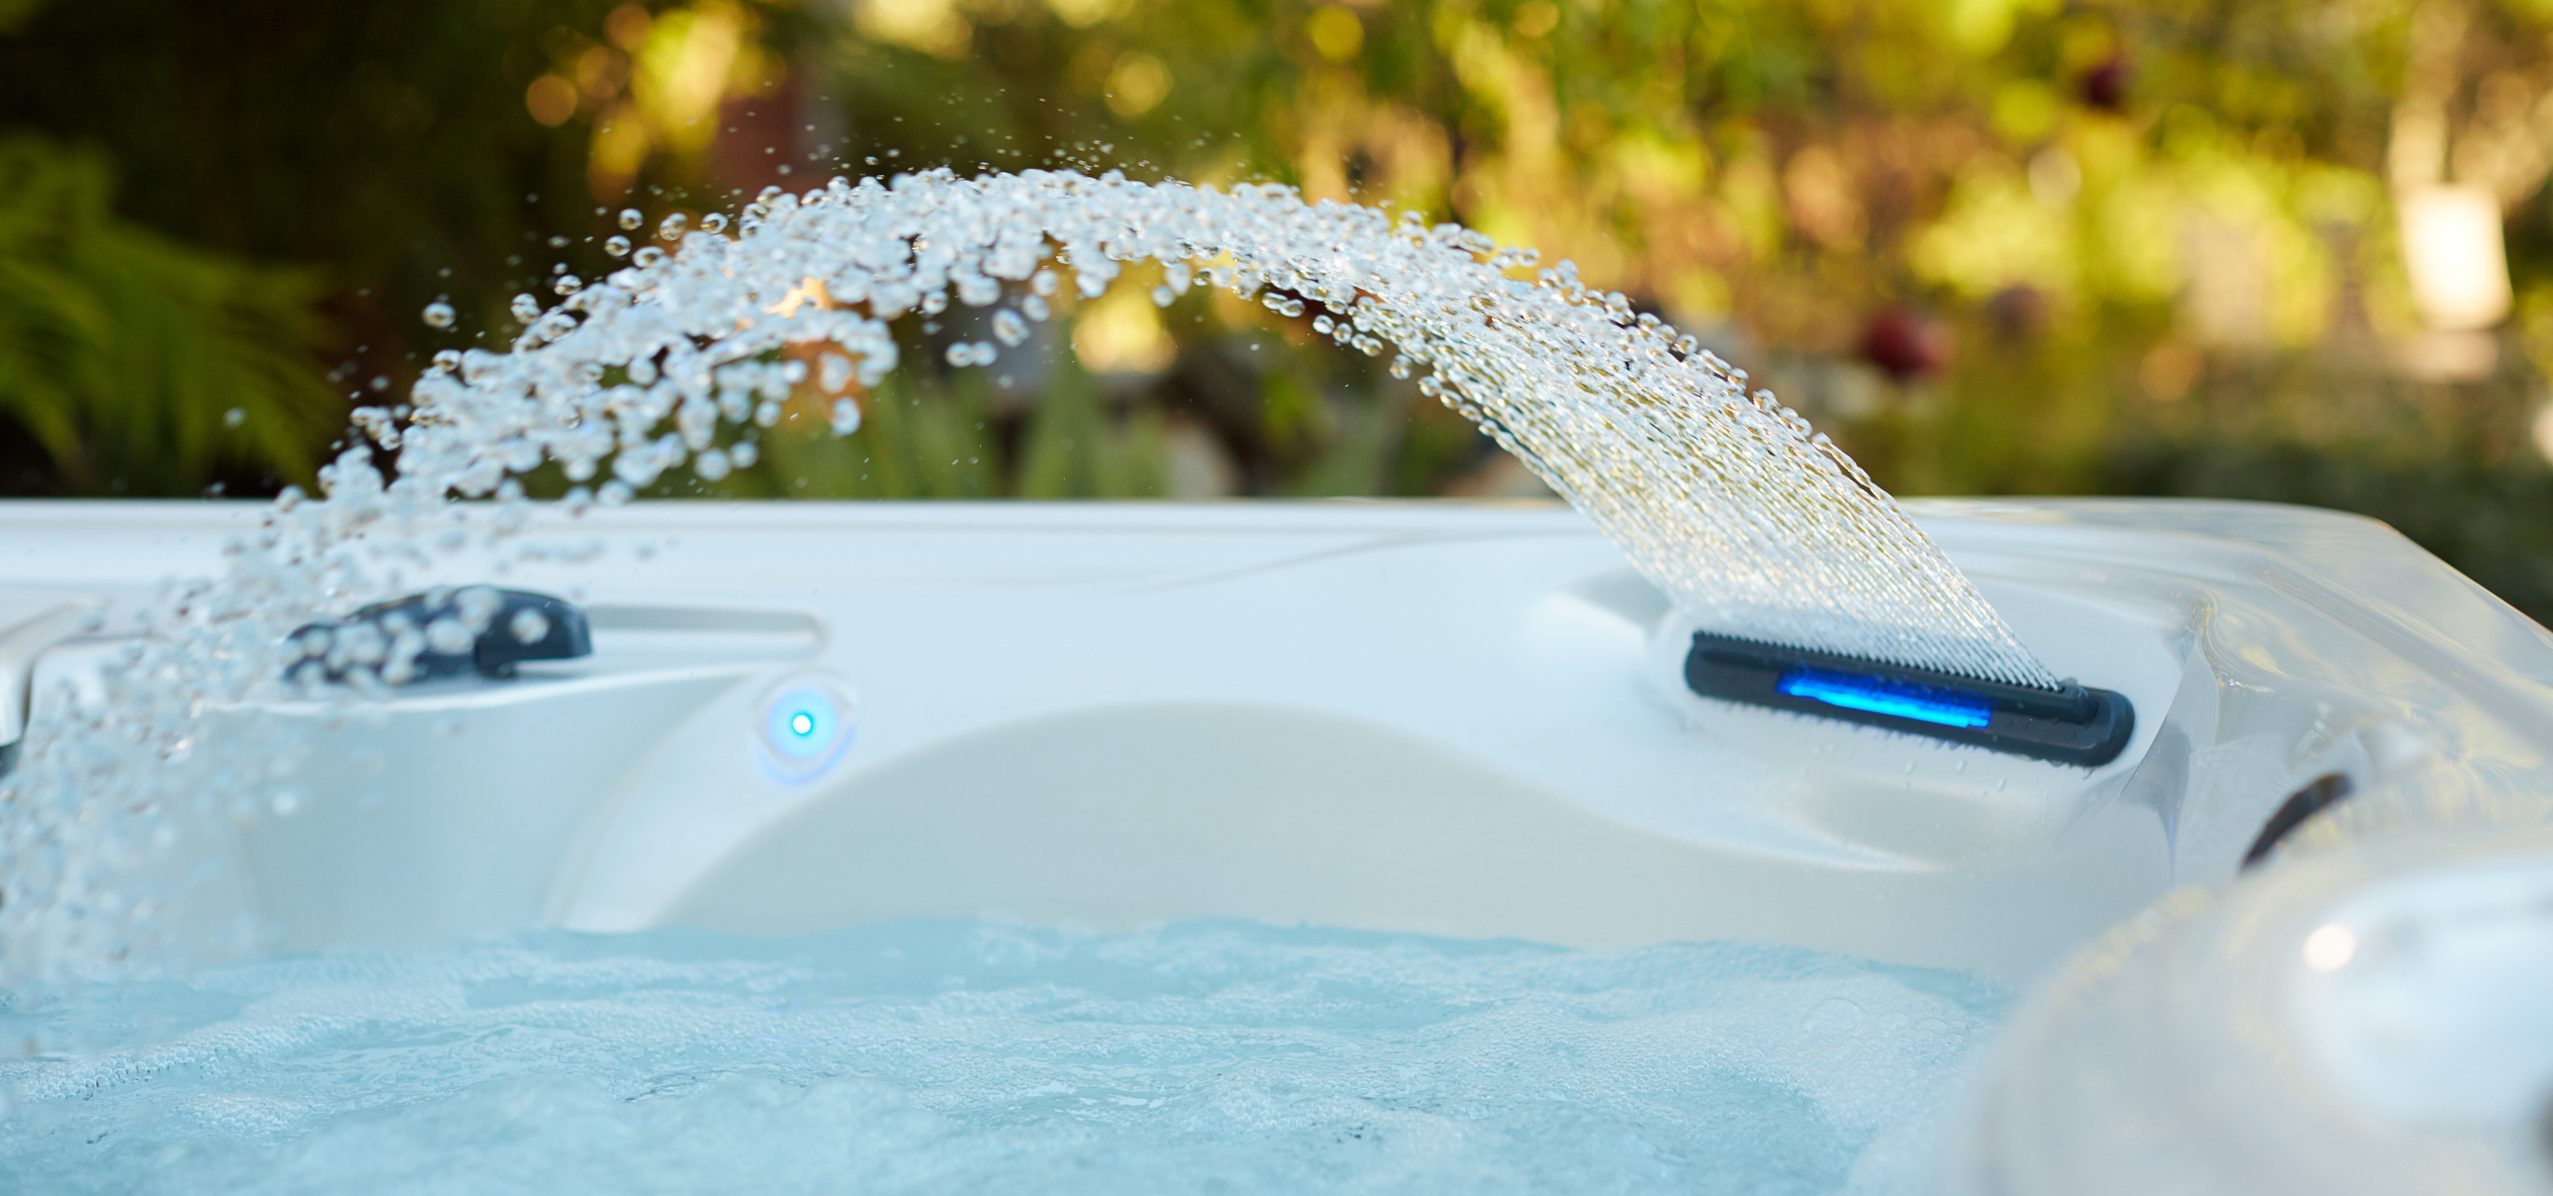 Hot Tub Care and Maintenance